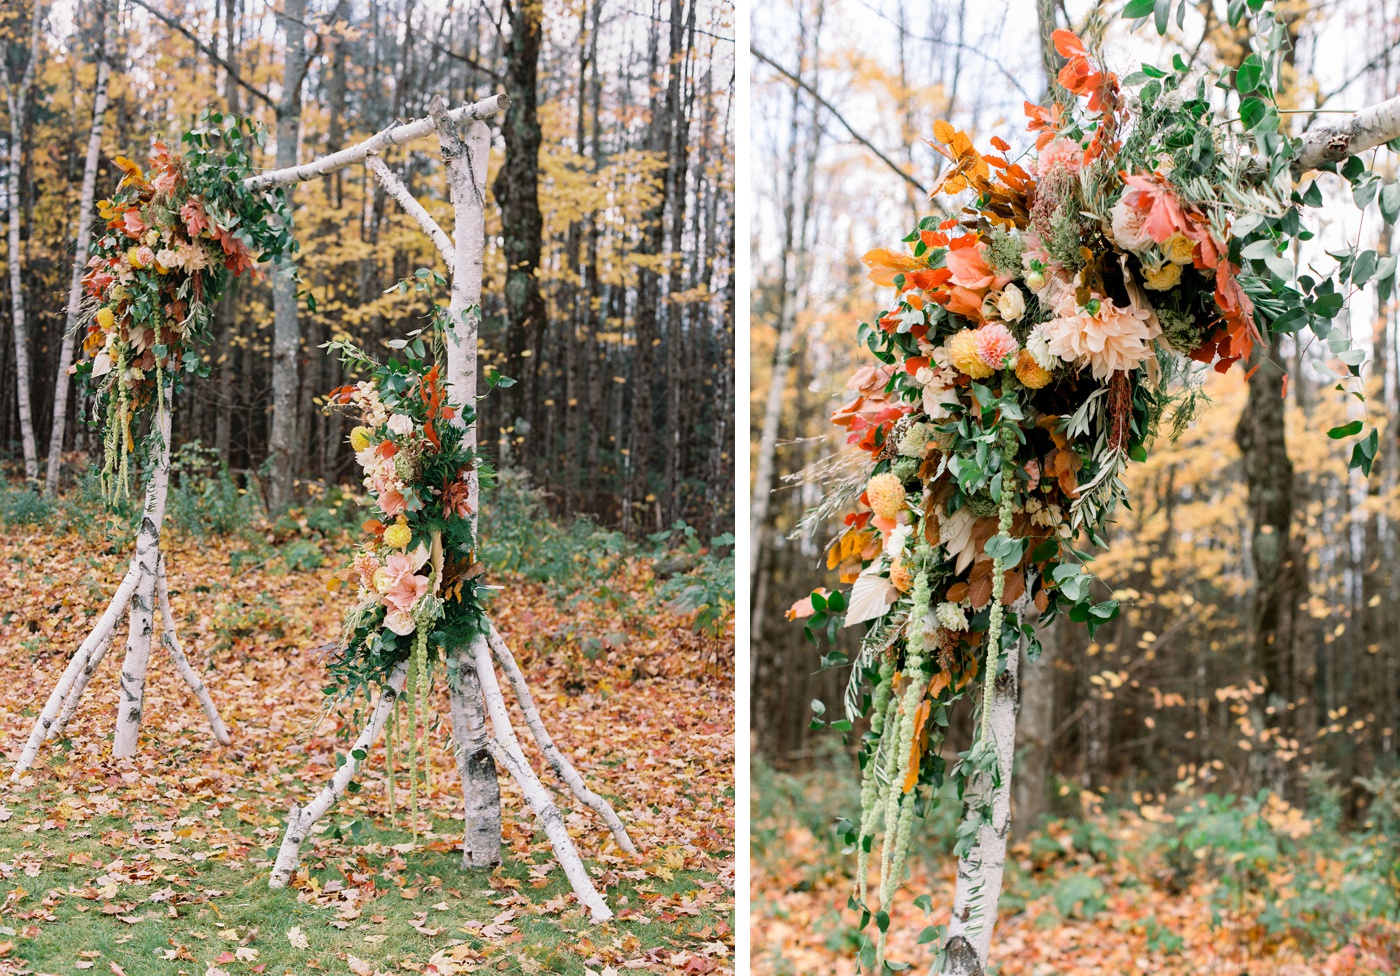 Arch made of birch wood and decorated with peach and yellow flowers for a fall wedding ceremony